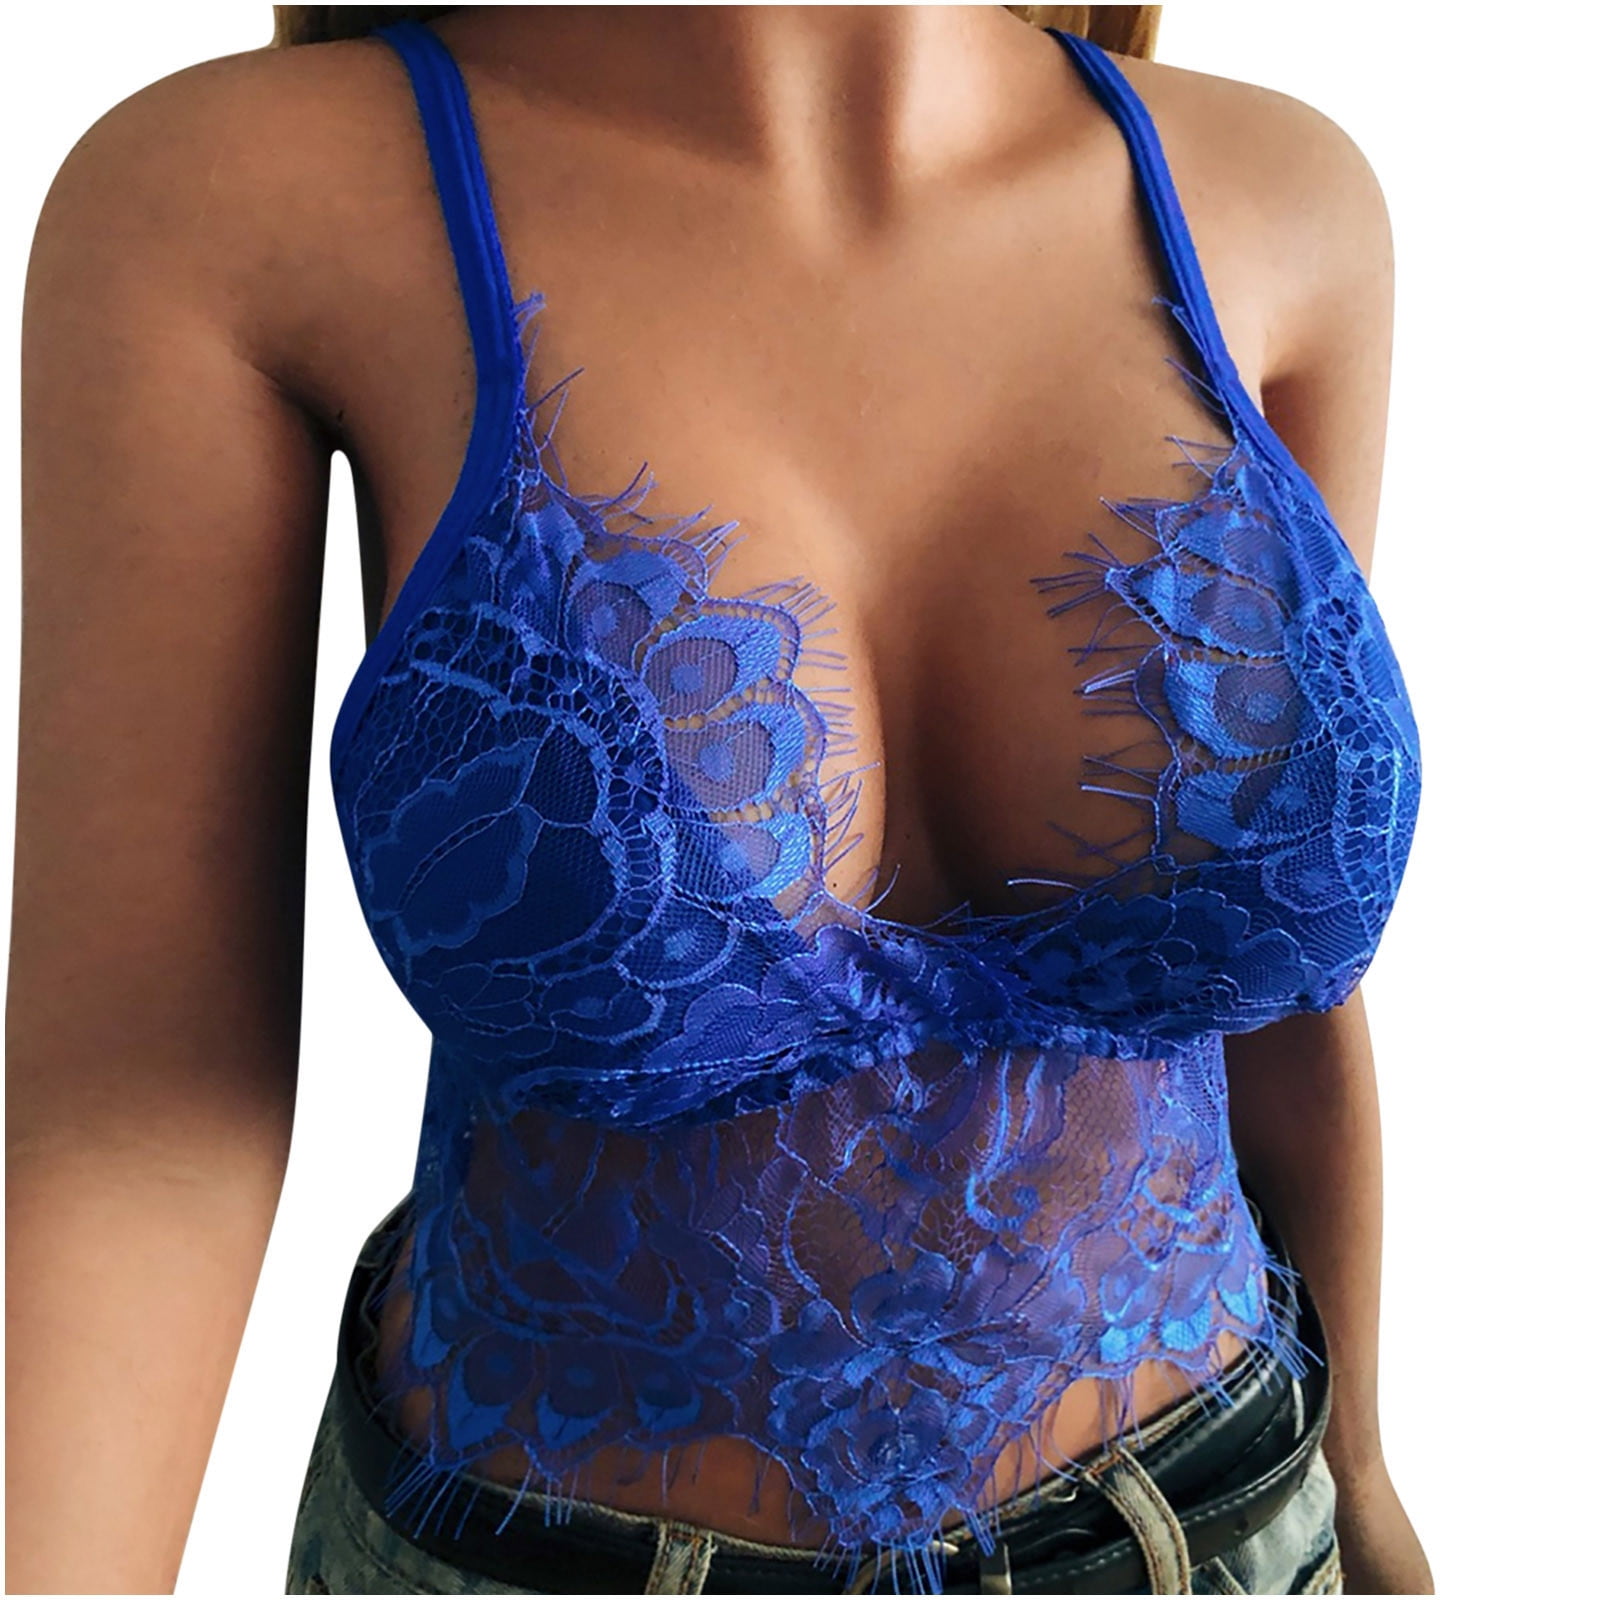 JeashCHAT Lingerie for Women Sexy Alluring Women Lace Cage Bra Elastic Cage  Bra Strappy Hollow Out Bra Bustier 